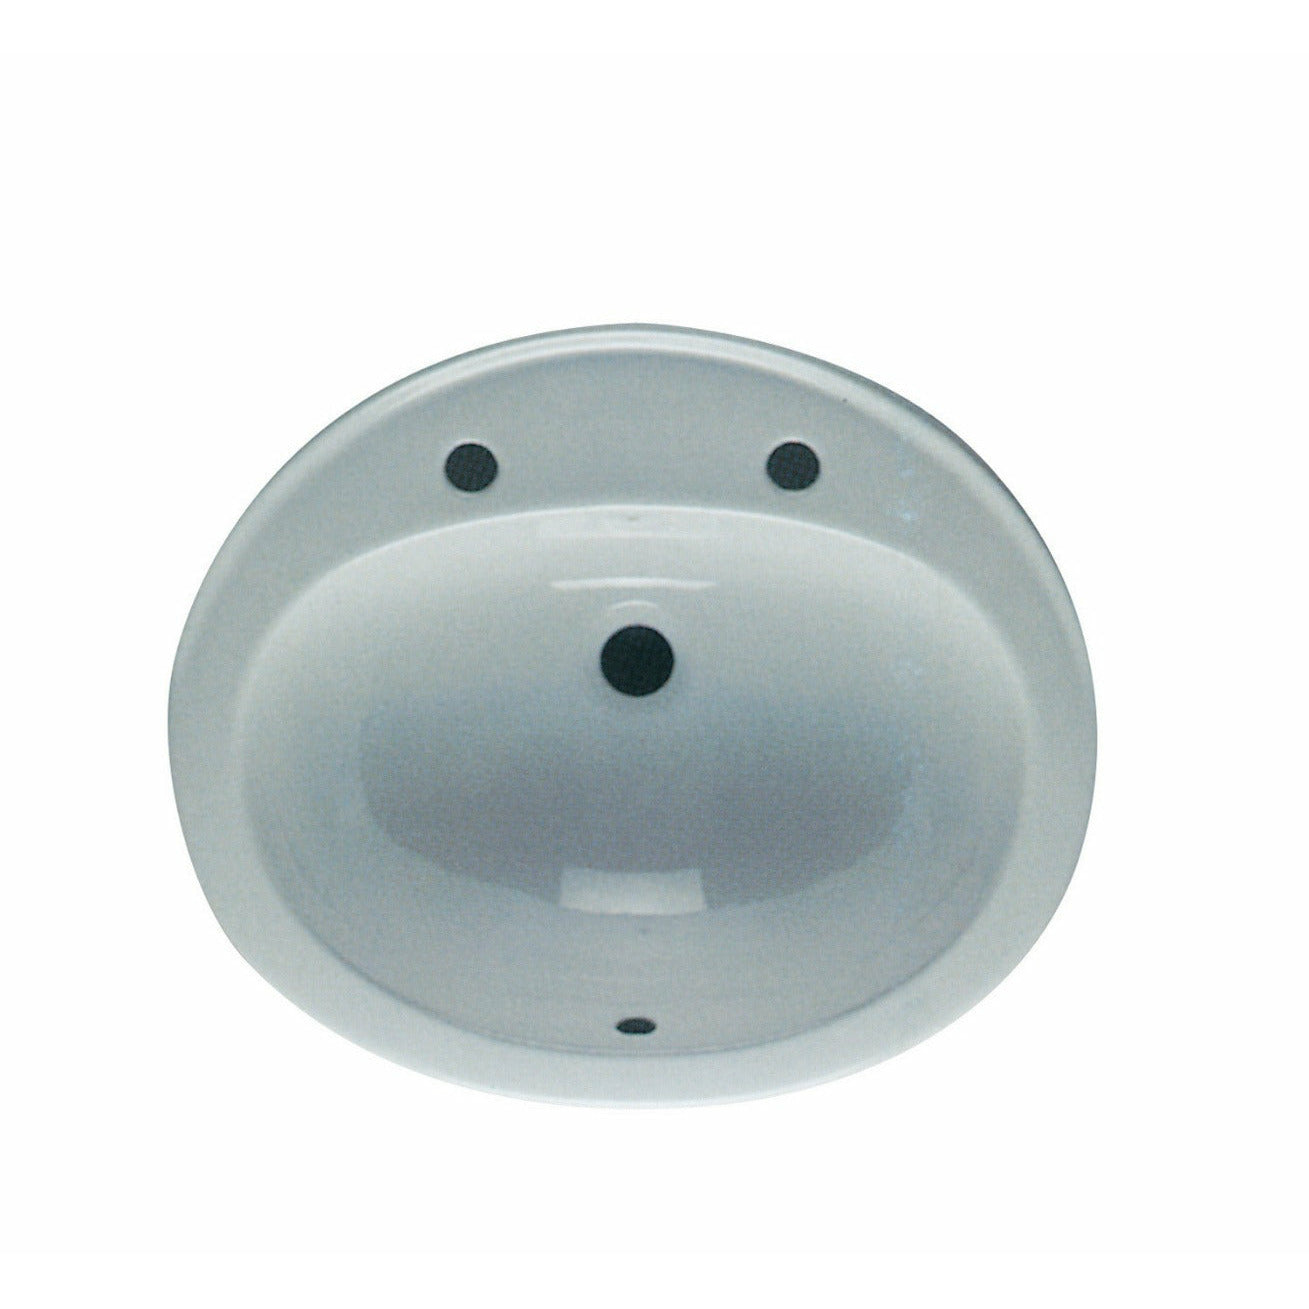 Frontline White Jessica 530mm Over-the-Counter Basin - 2 Tap Holes - Letta London - 